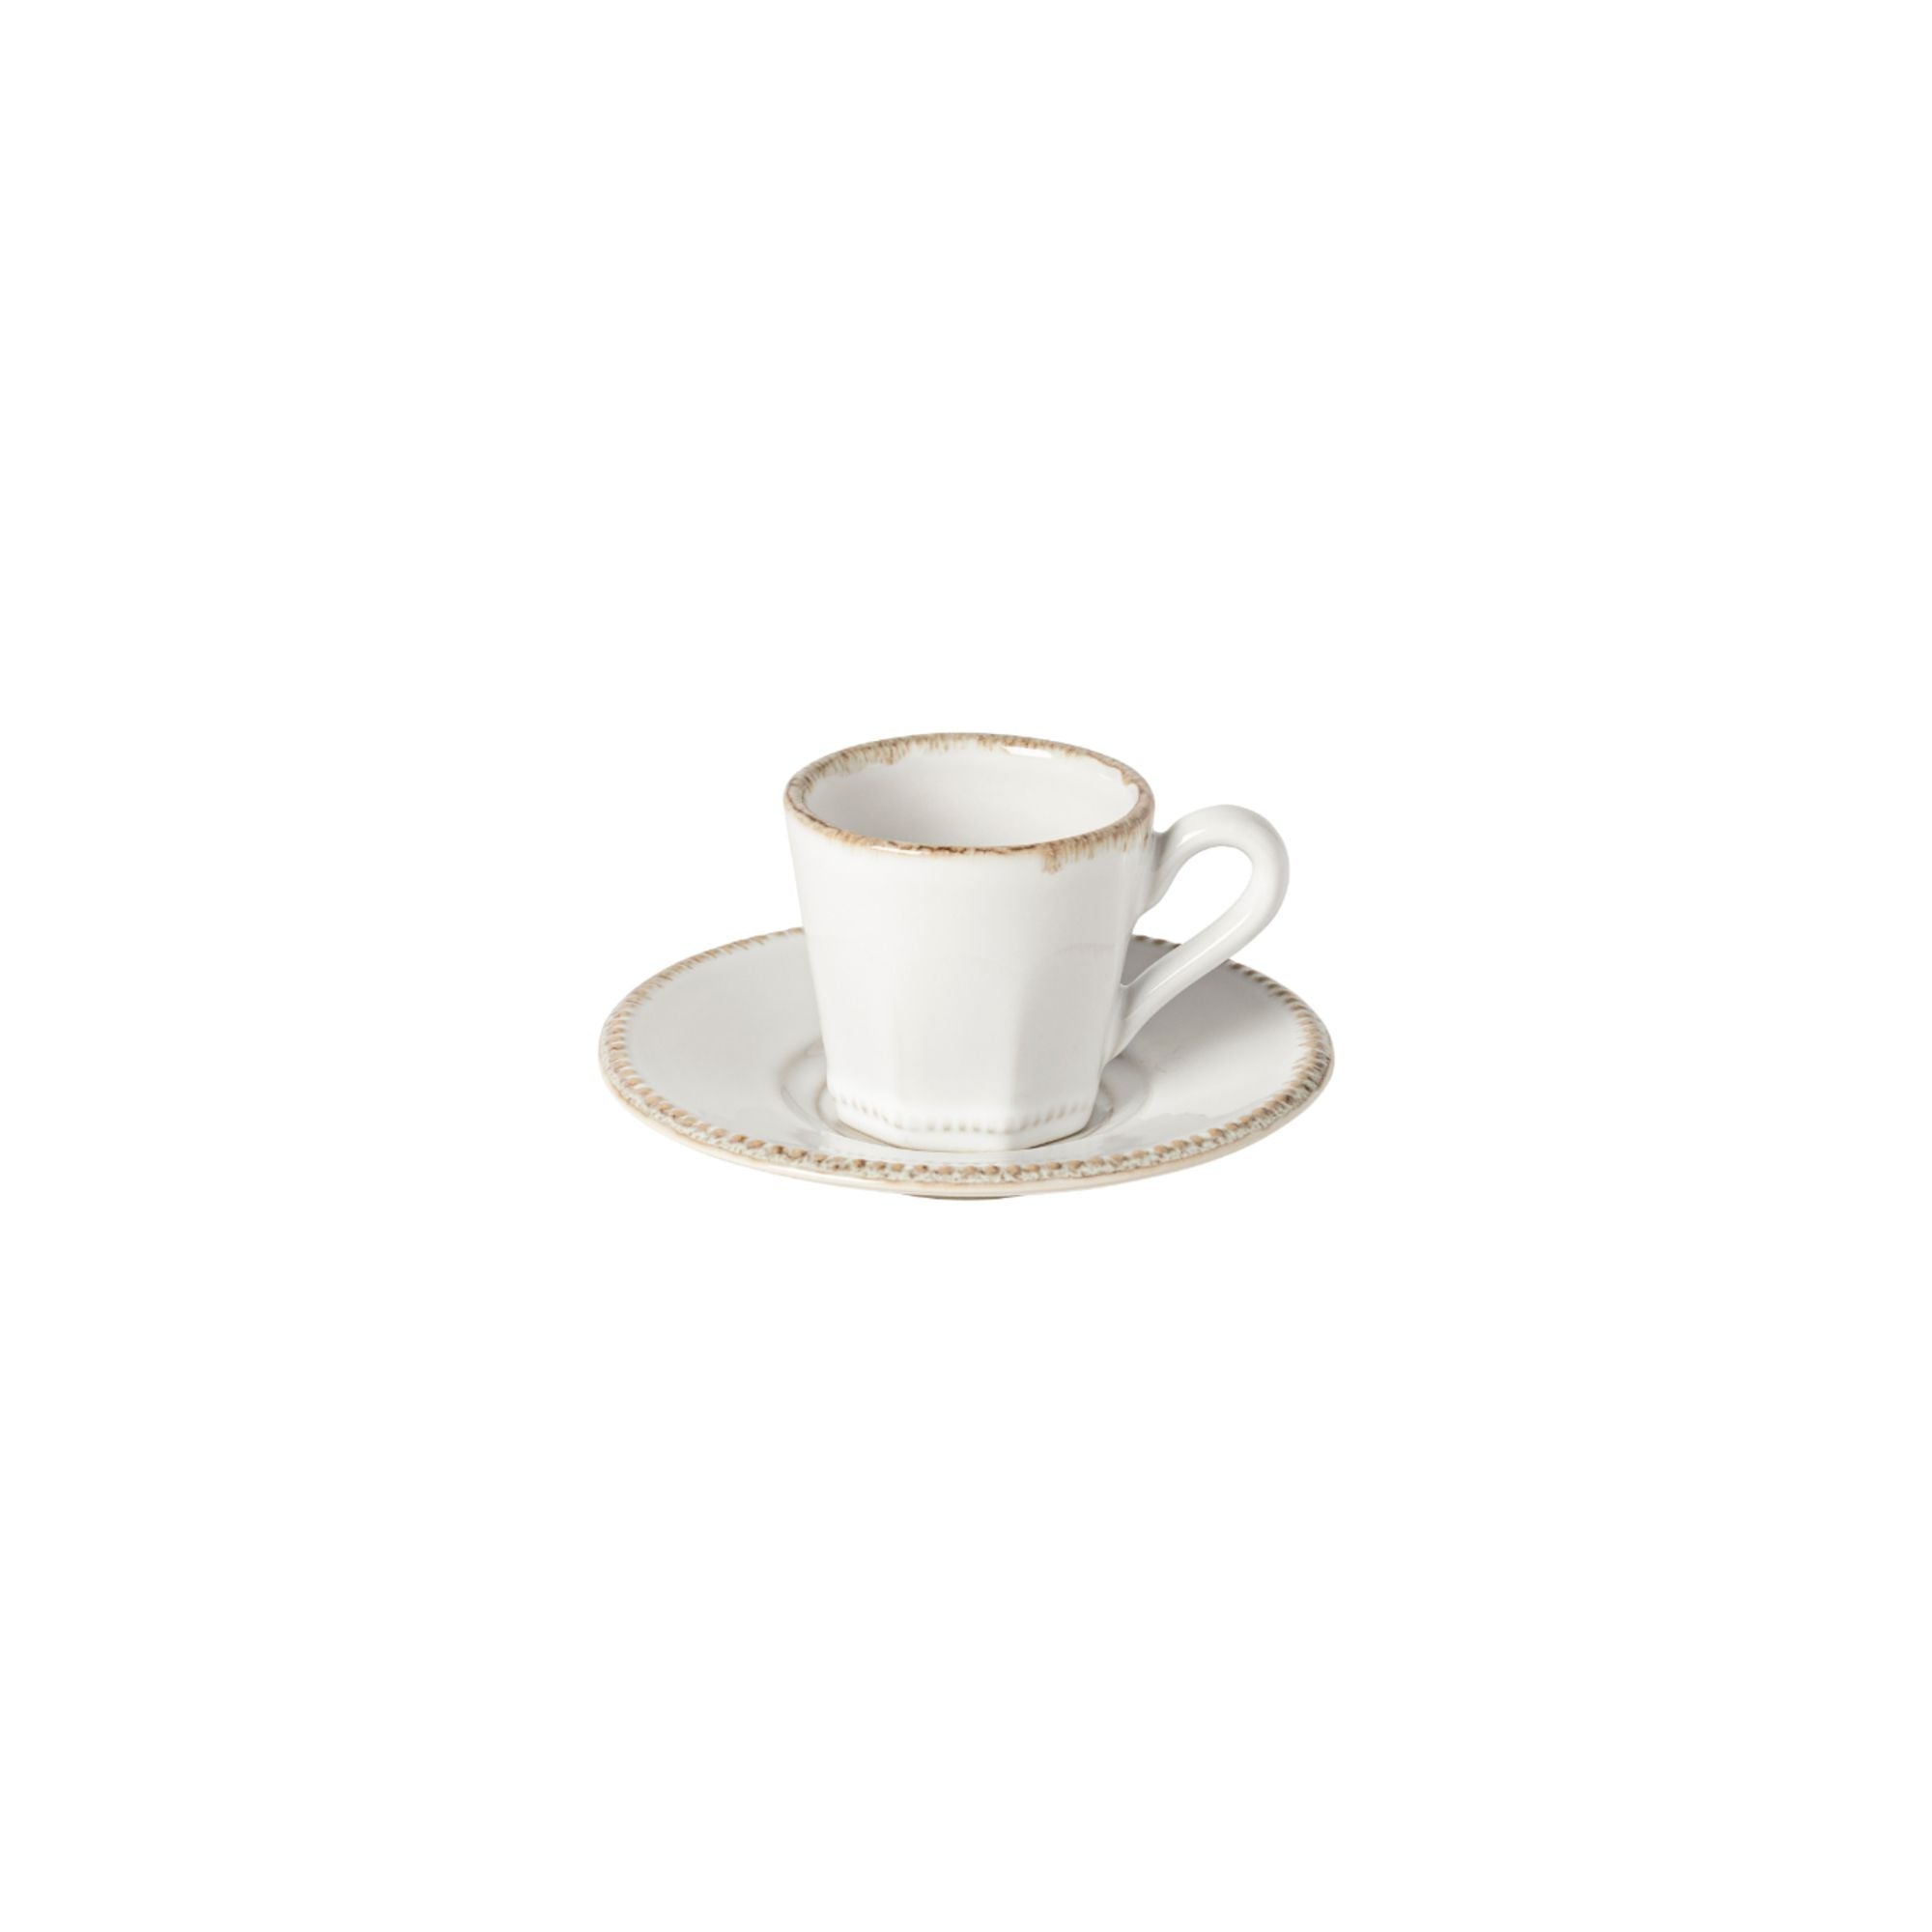 Luzia Coffee Cup and Saucer 5 oz. Cloud White